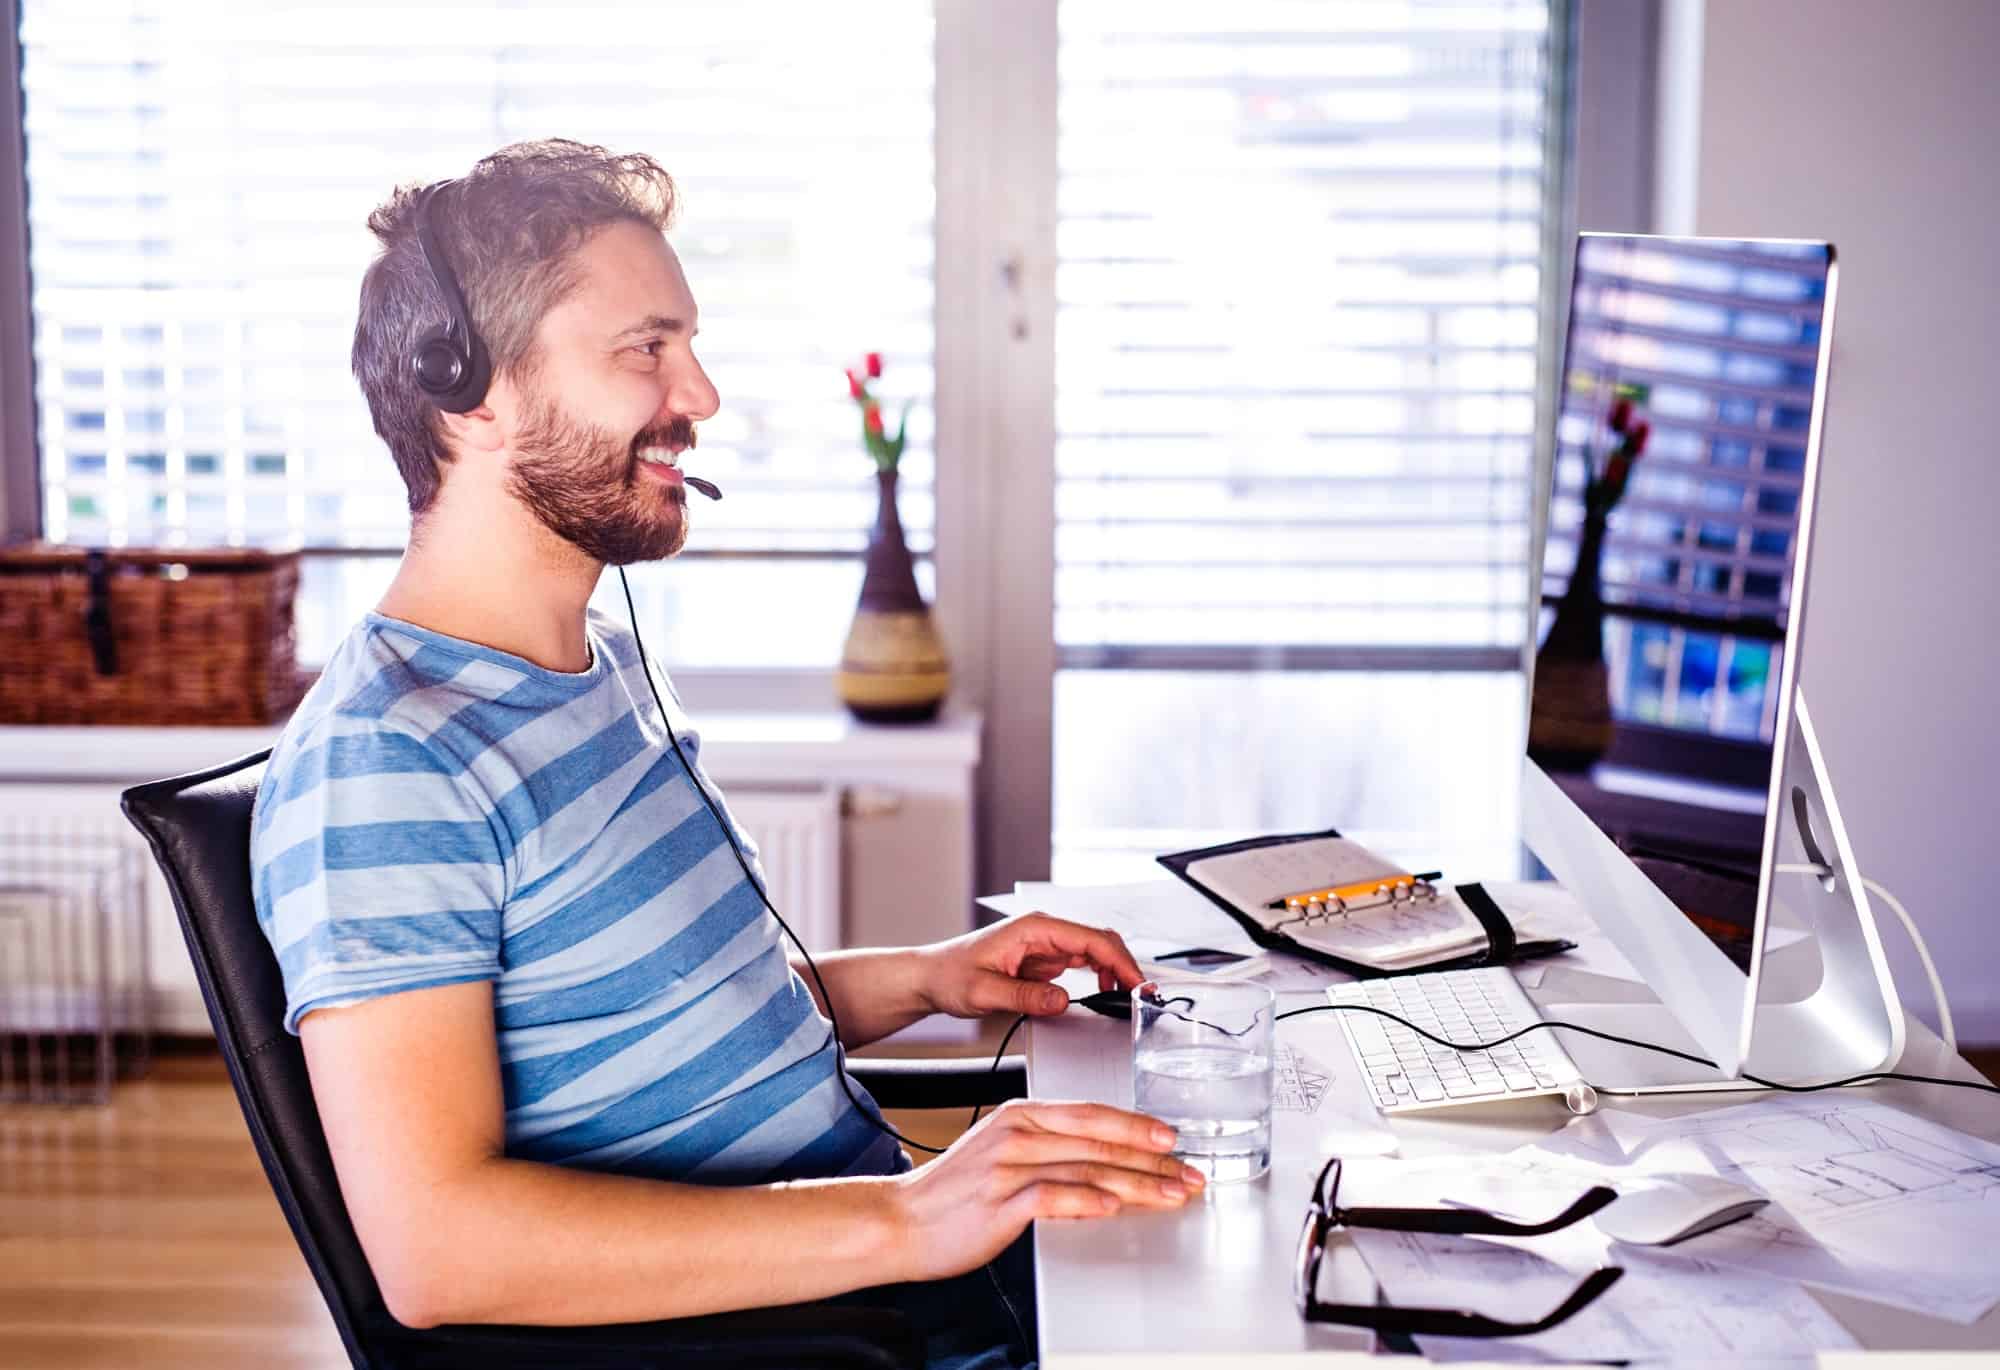 Man sitting in front of computer, working from home and wearing headphones